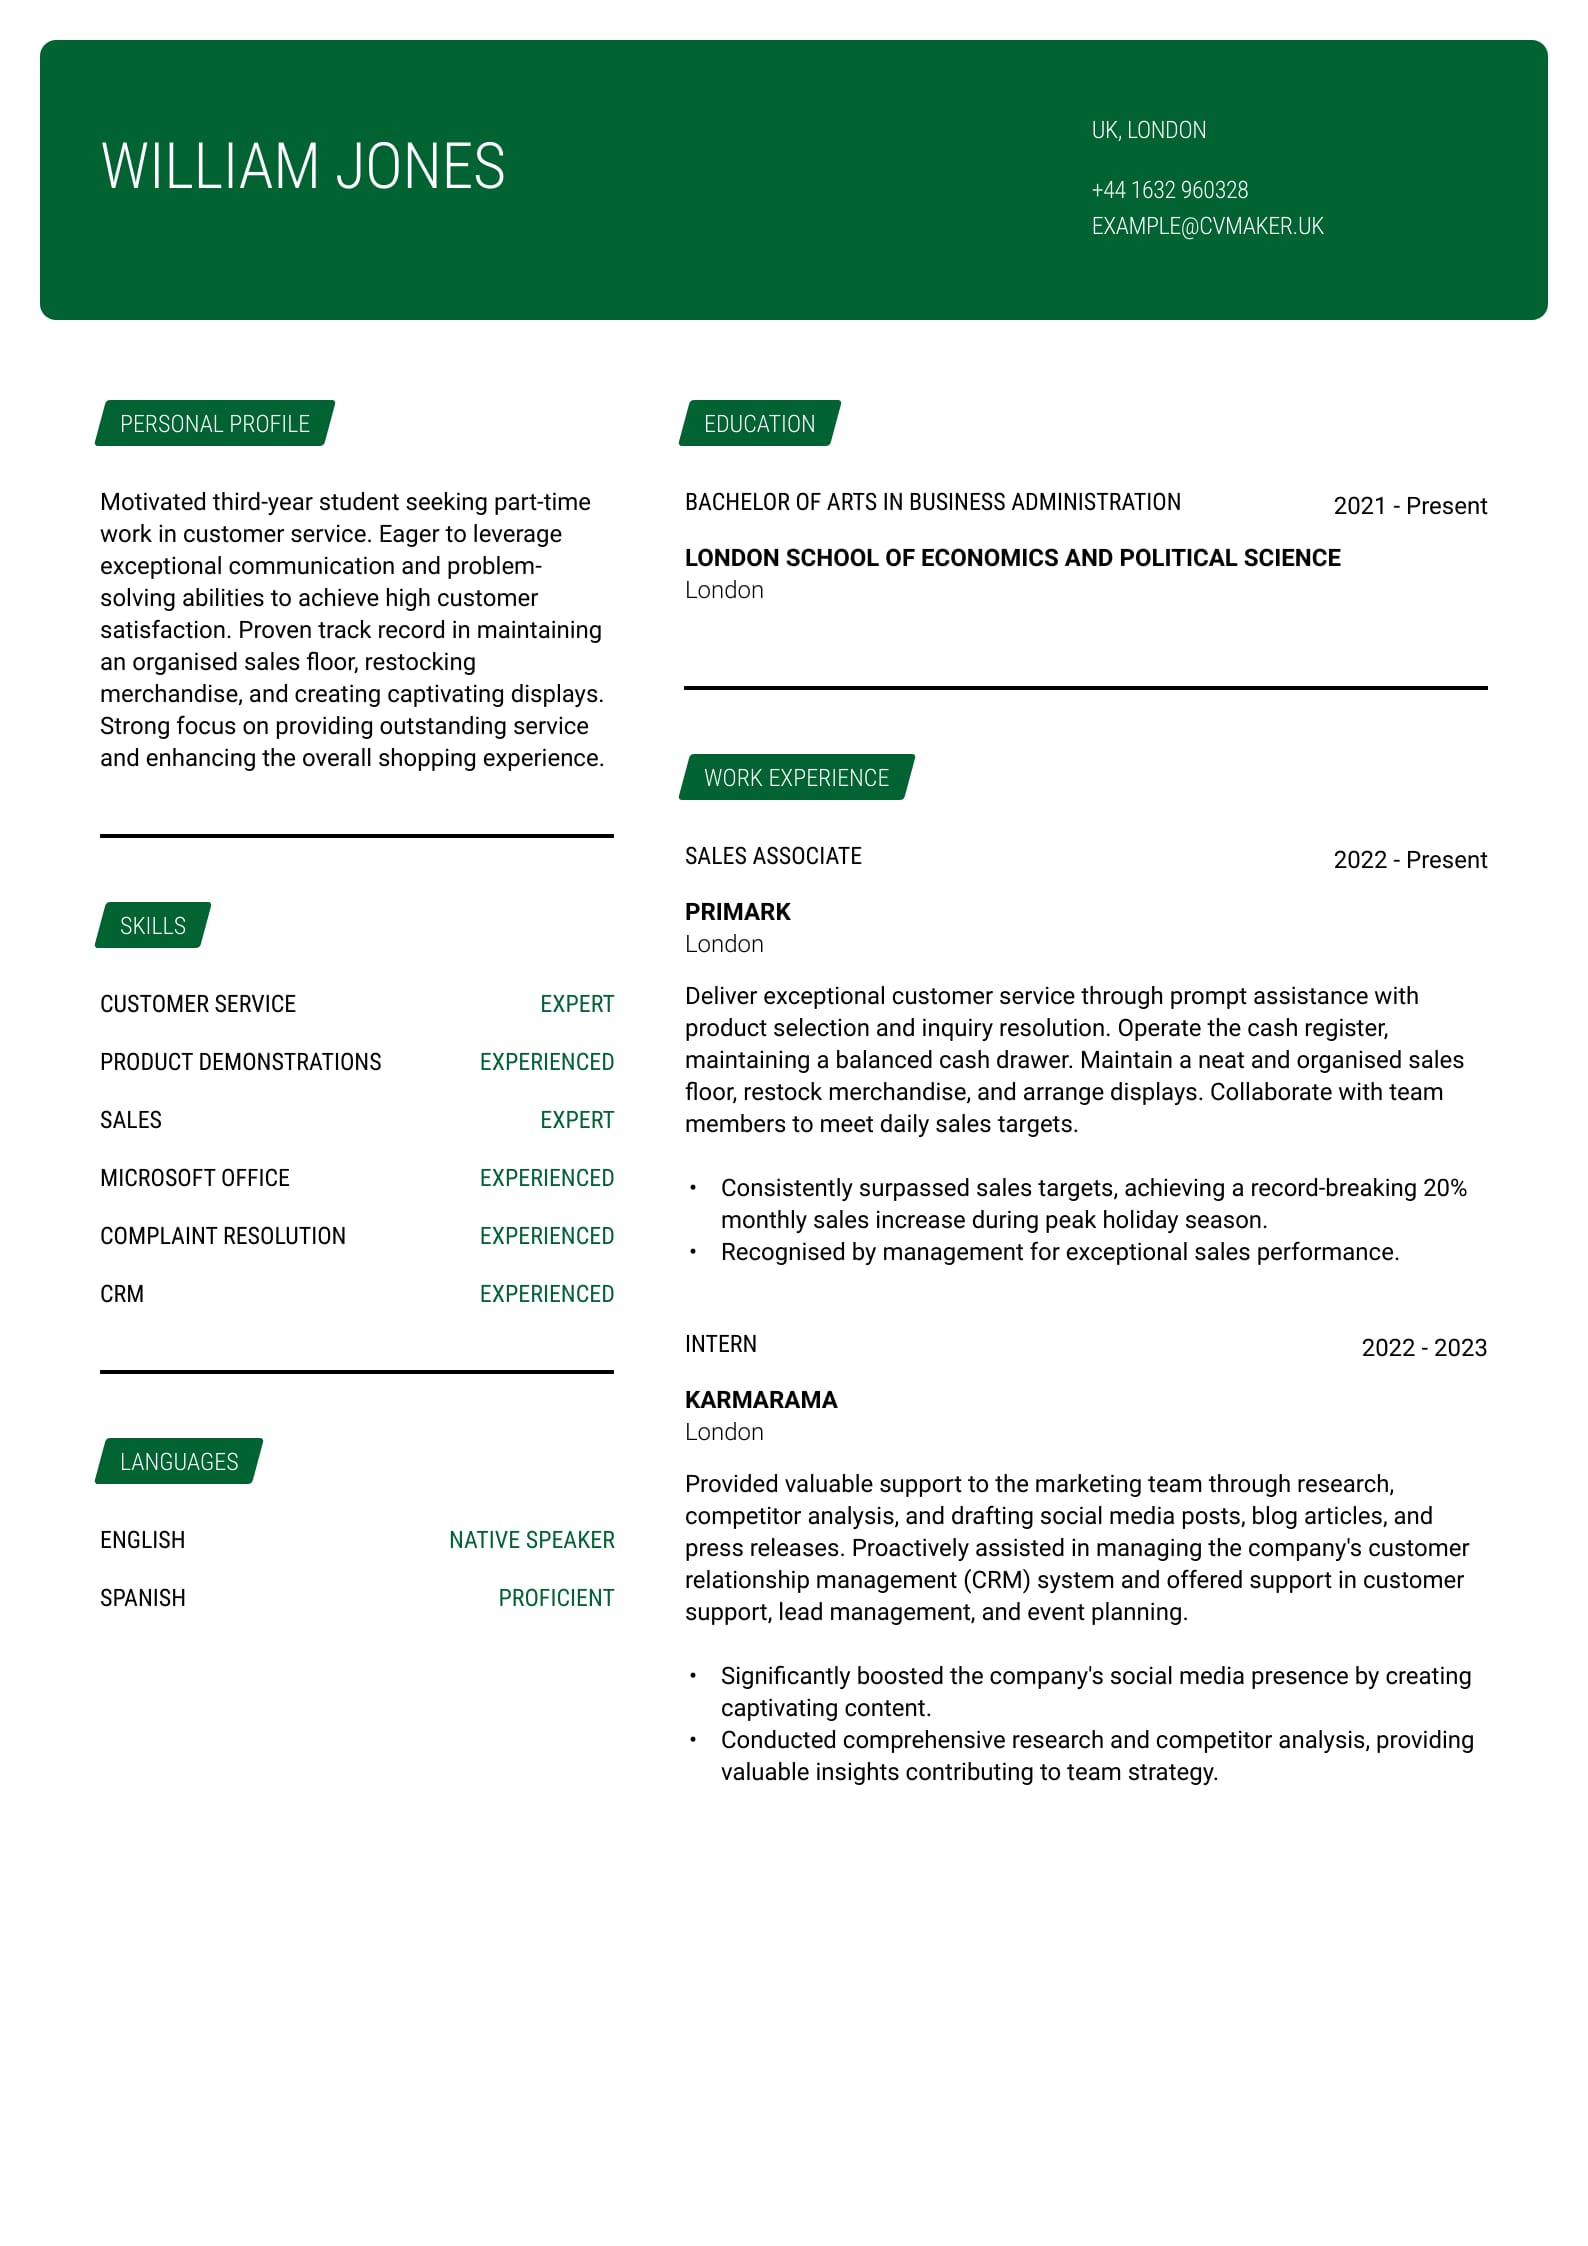 CV example - Part time - Cornell template